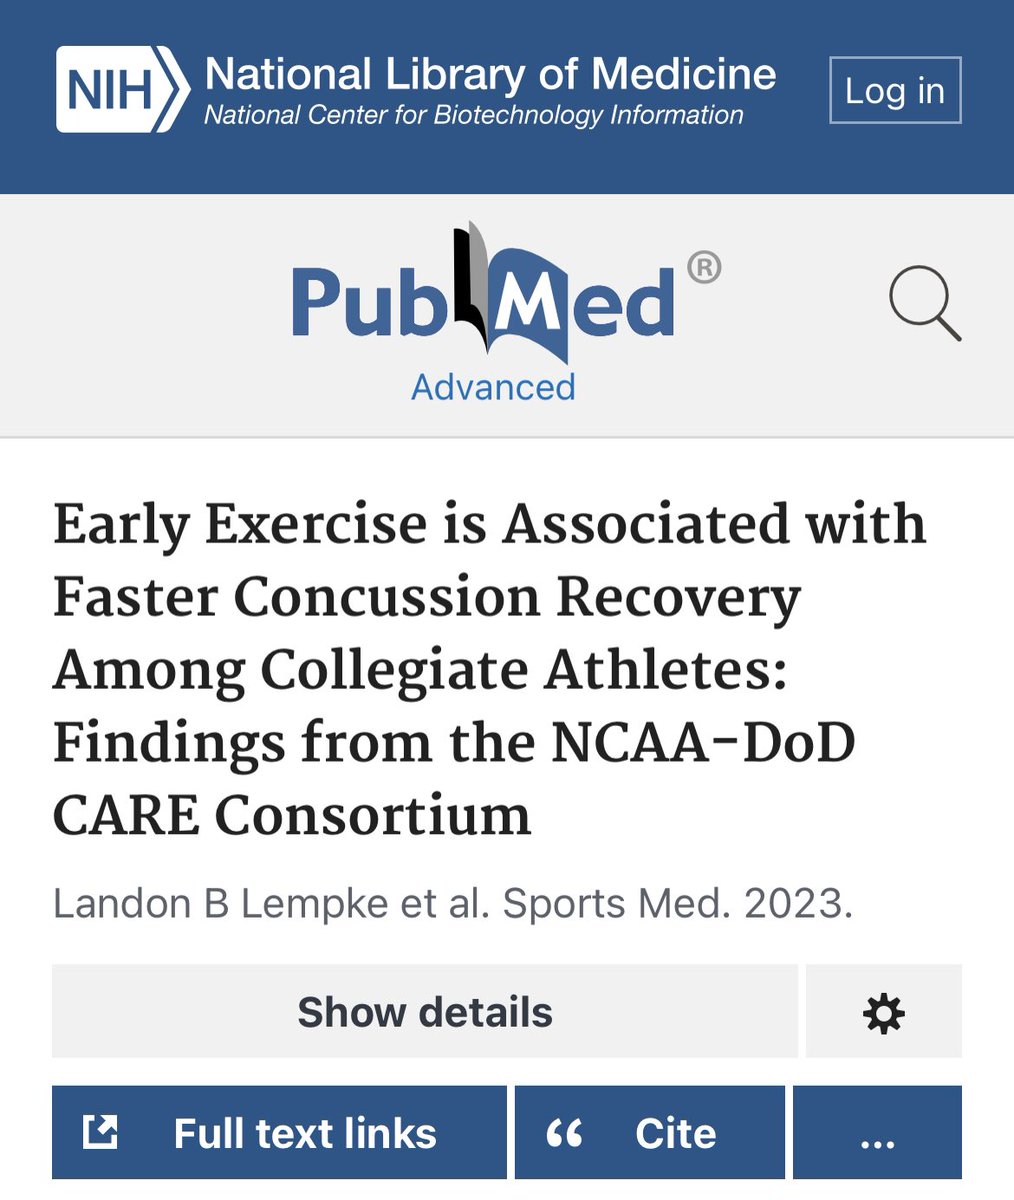 🧠New Care Consortium #Concussion Data: Compared to the no-exercise group, the early exercise group was 92% more probable to experience symptom recovery, 88% more probable to reach clinical recovery, & took a median of 2.4 & 3.2 days less to recover. The late exercise group